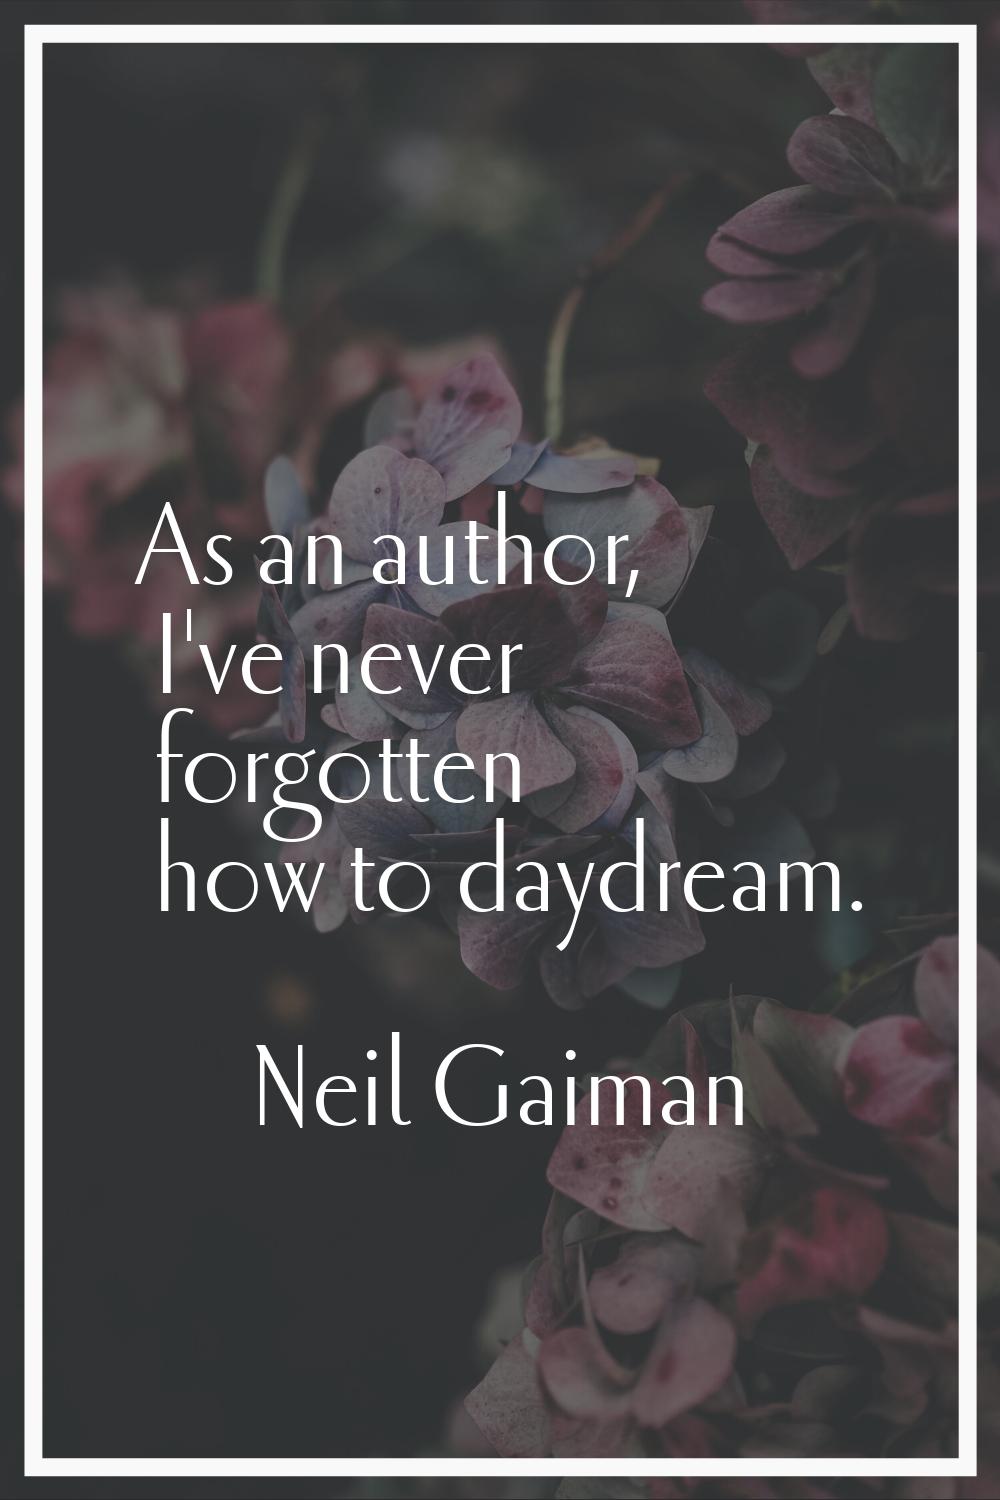 As an author, I've never forgotten how to daydream.